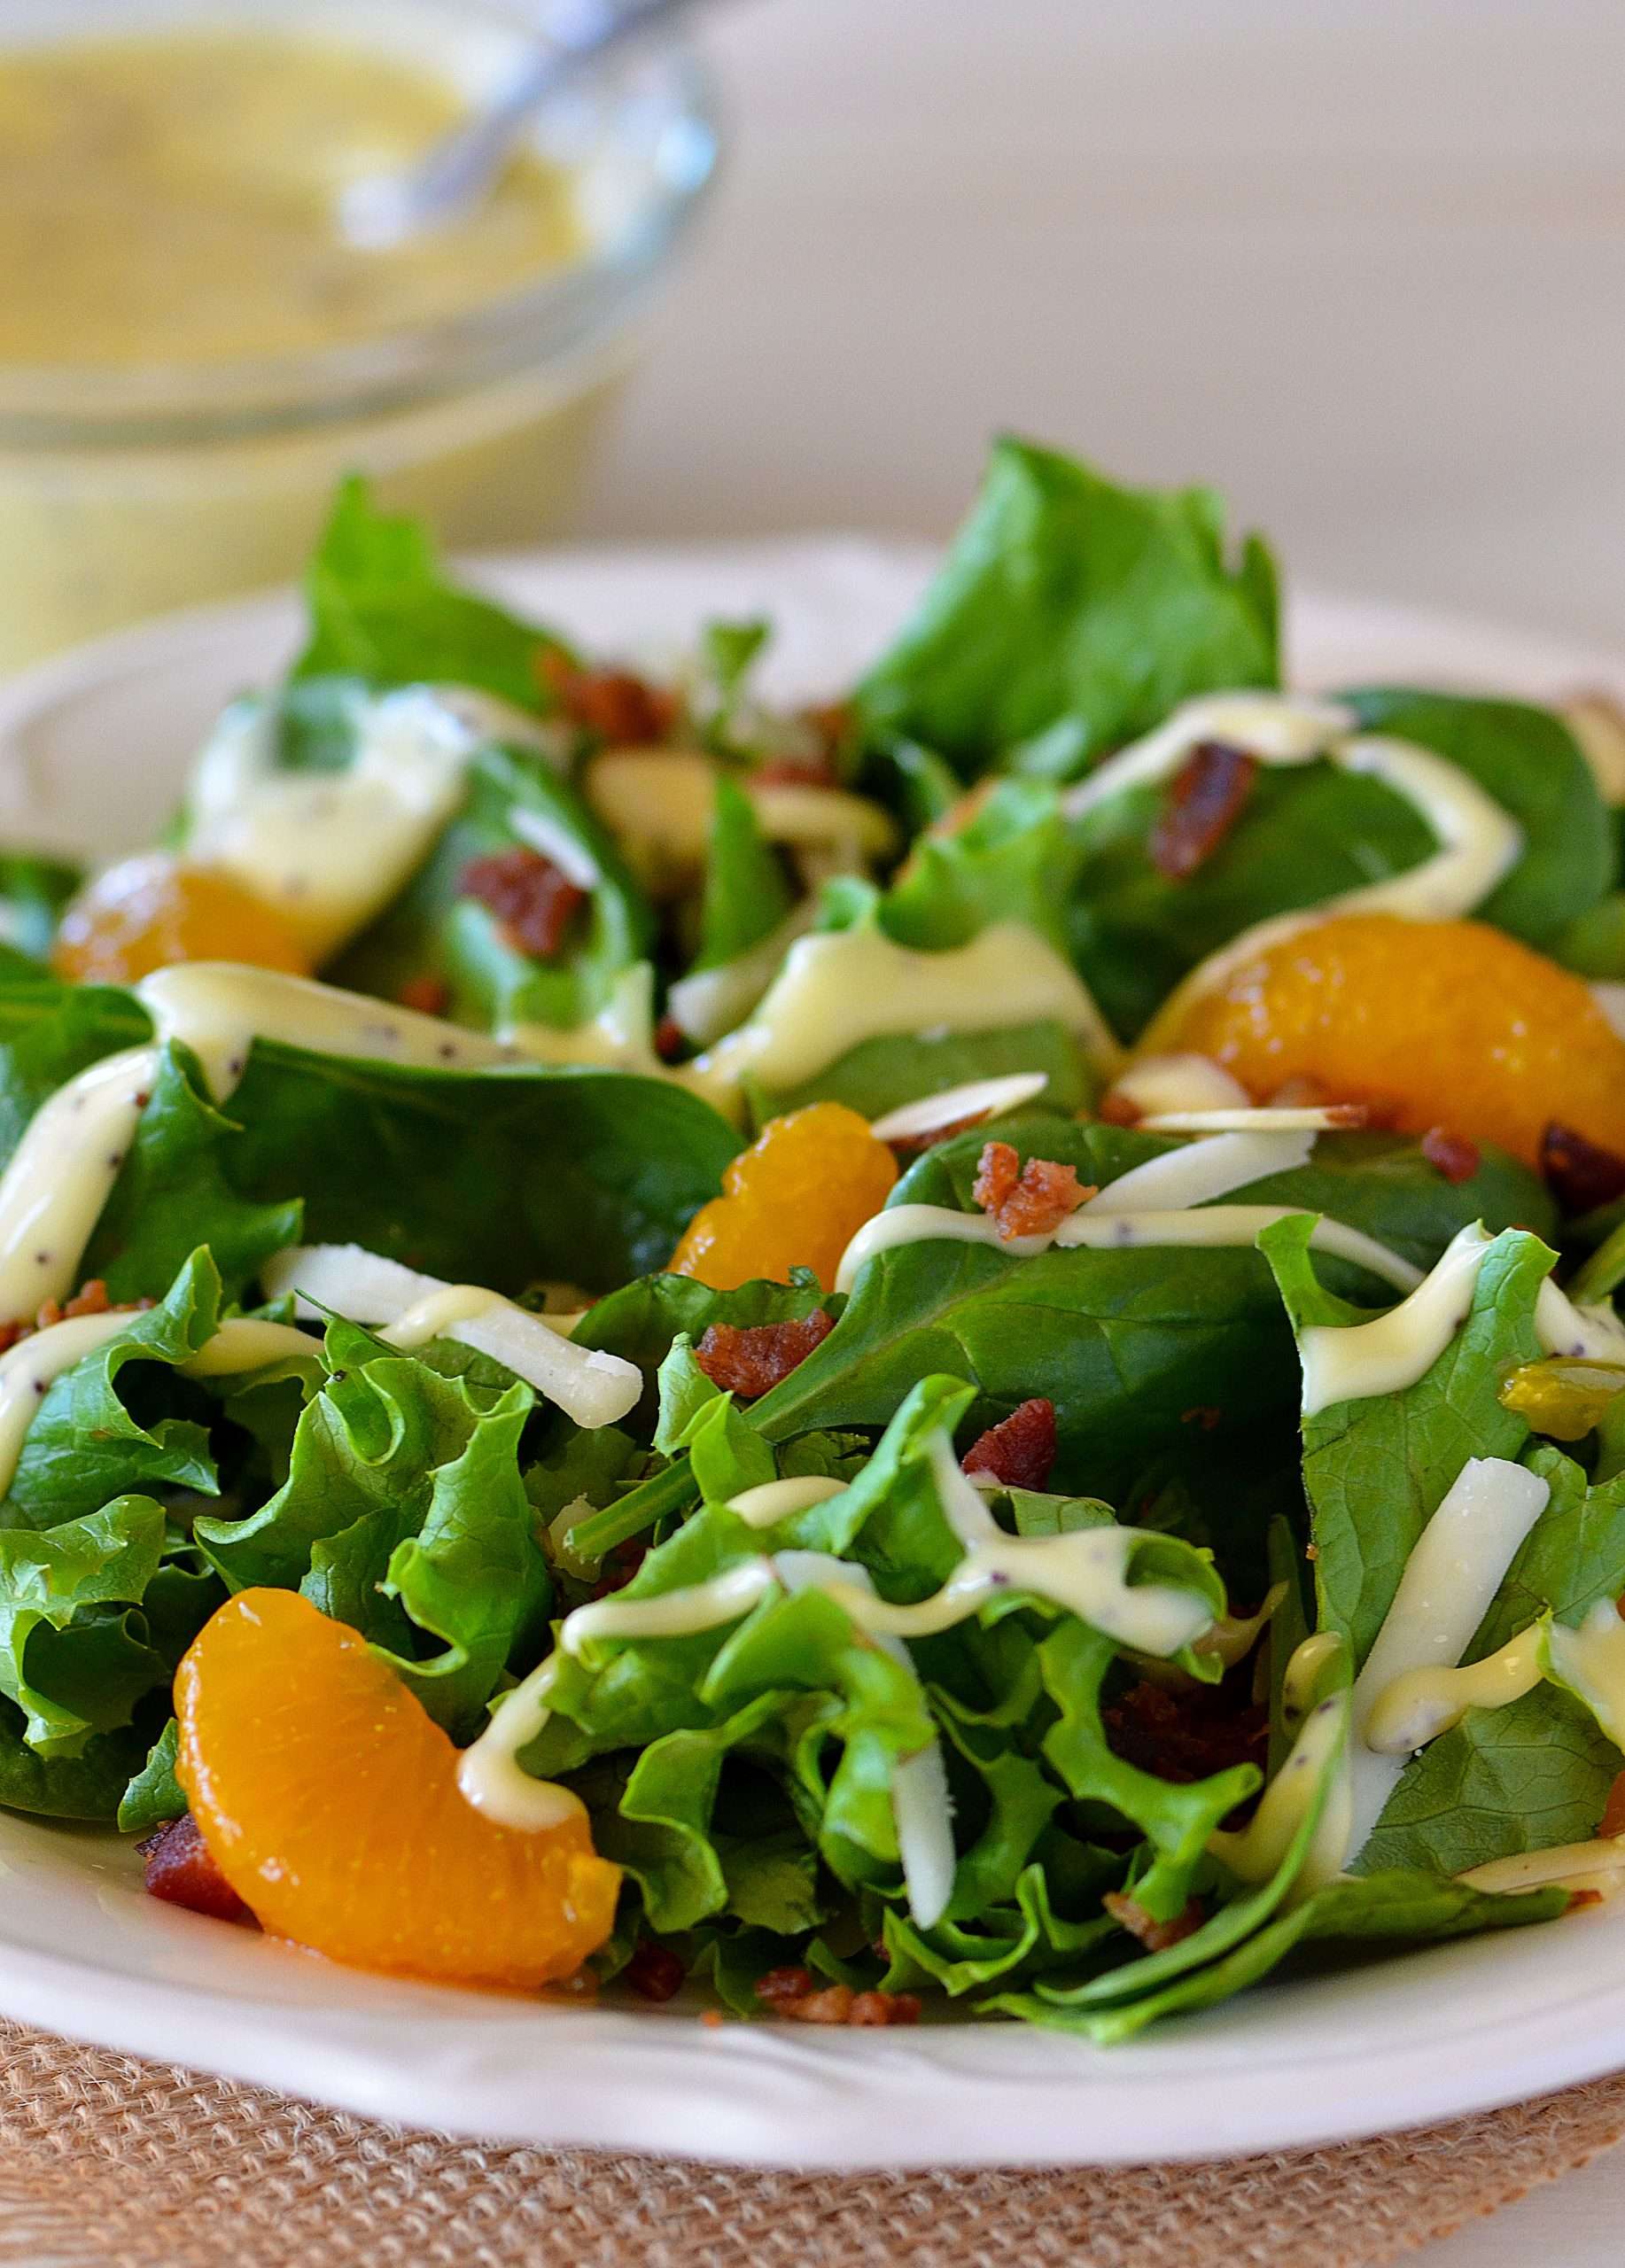 Spinach Salad with Bacon, Almonds and Oranges